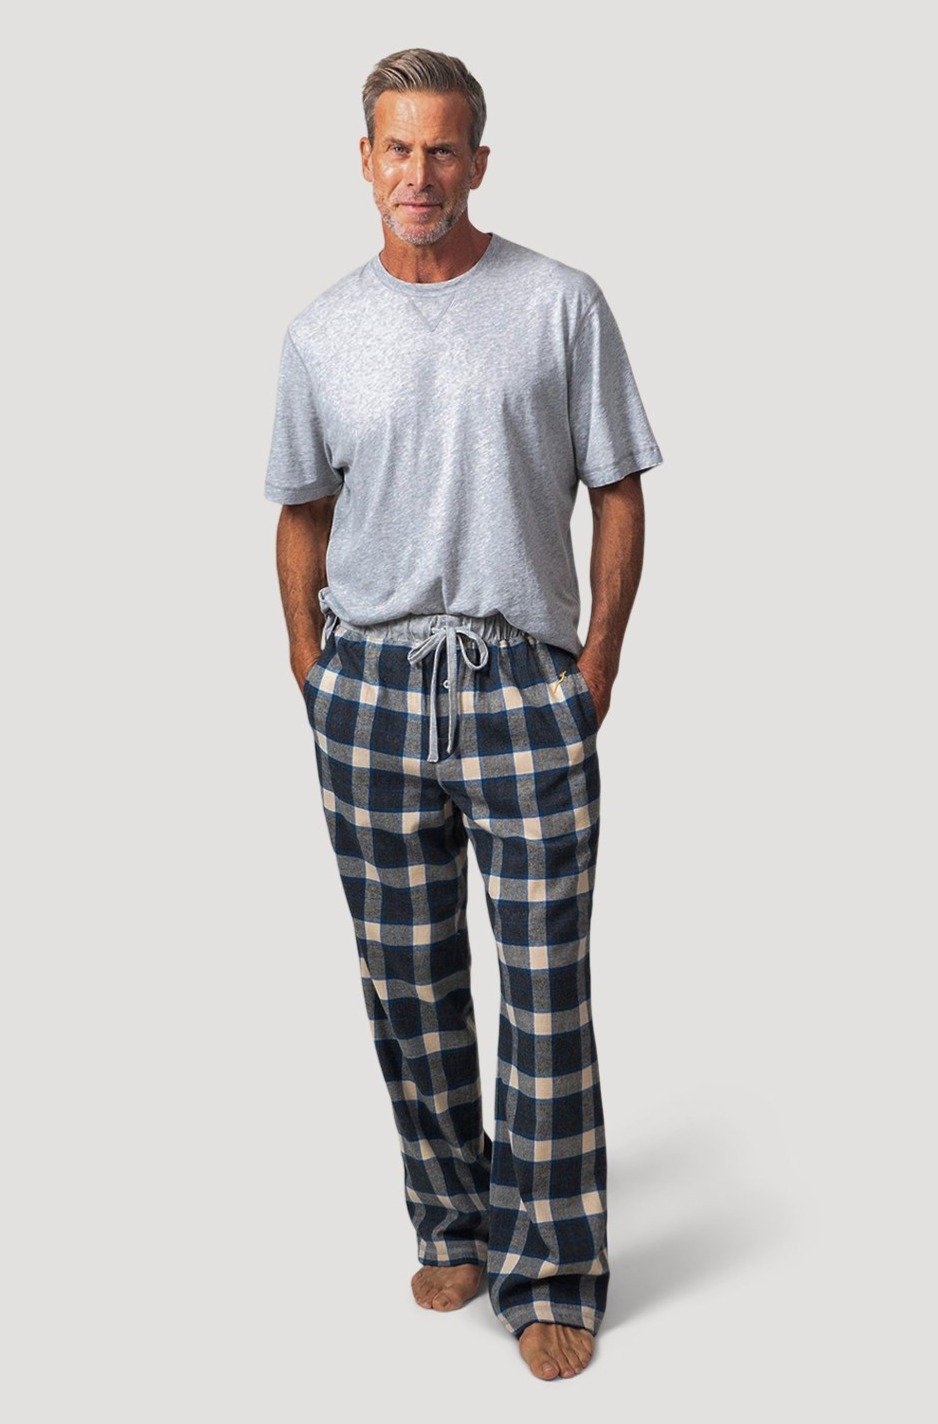 NATURAL/BLUE STILLWATER CHECK FLANNEL PANT - Kingfisher Road - Online Boutique